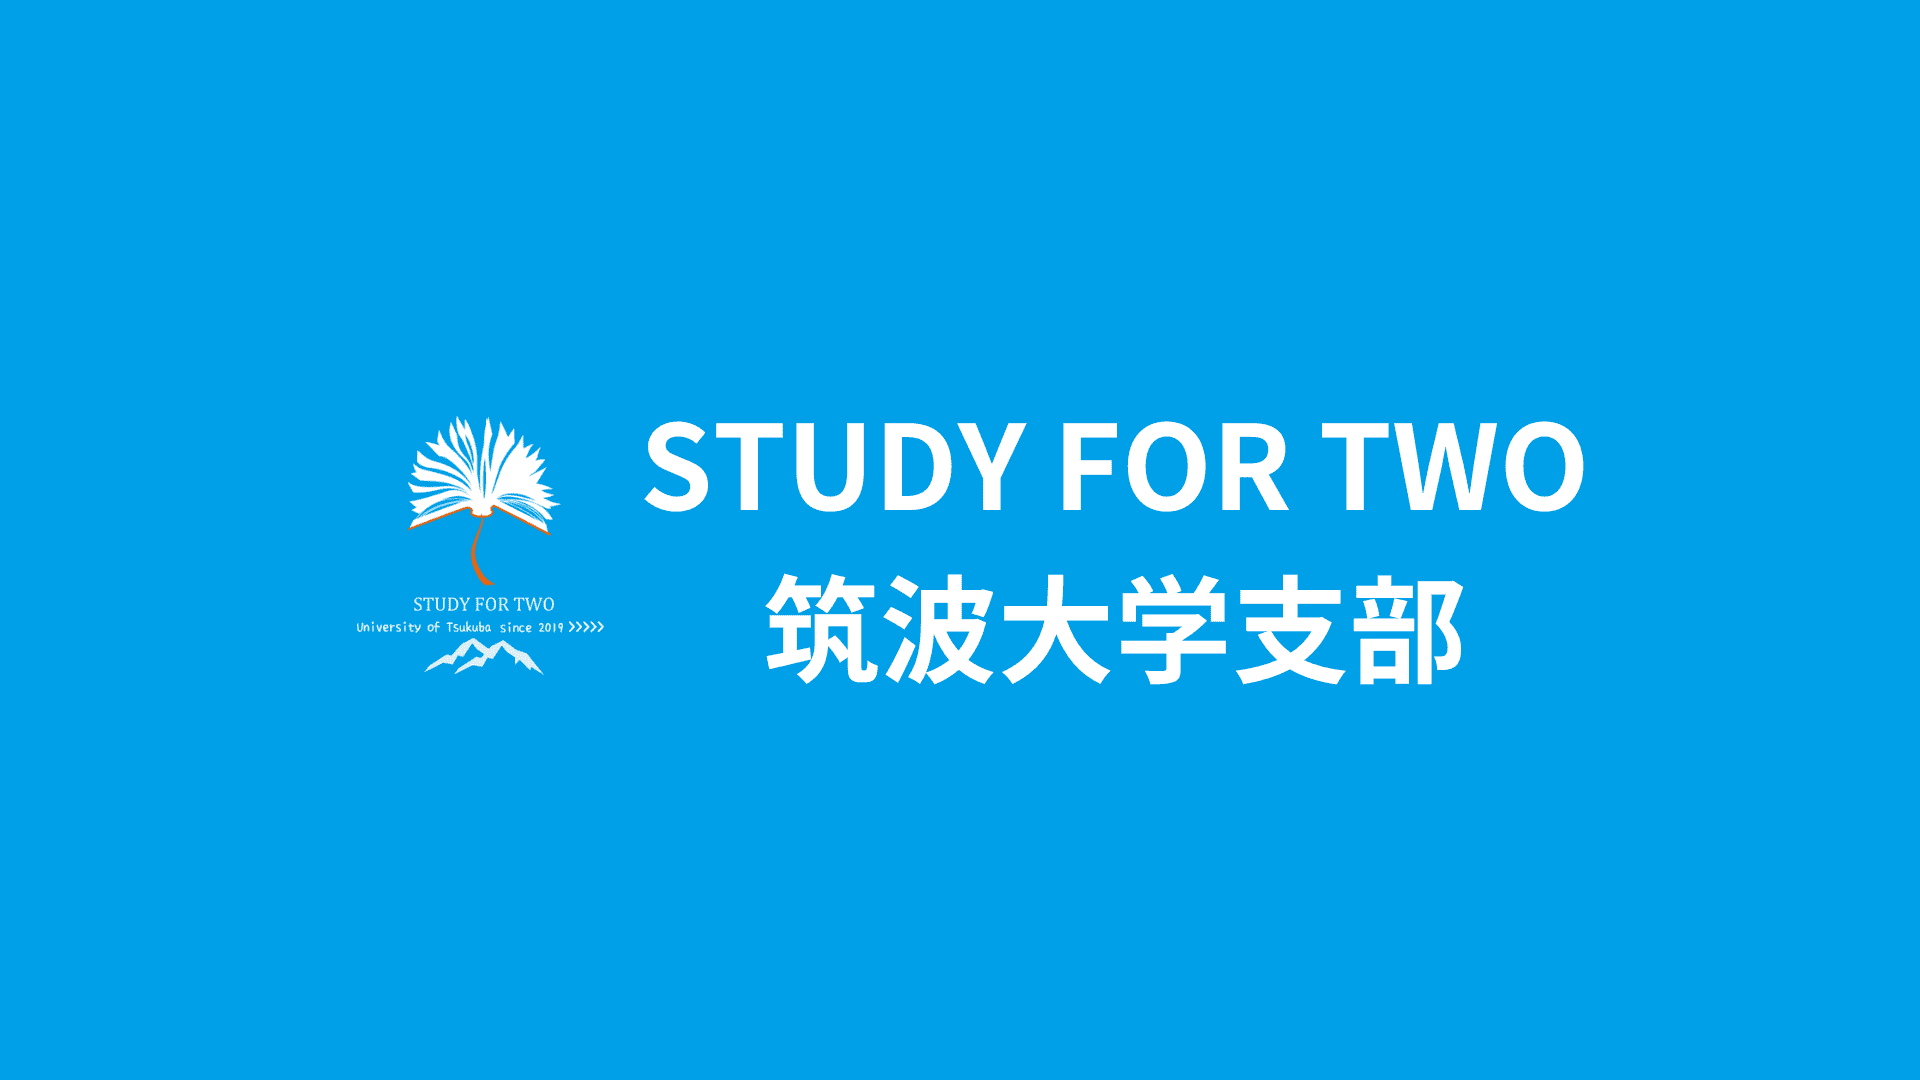 STUDY FOR TWO 筑波大学支部のサムネイル画像